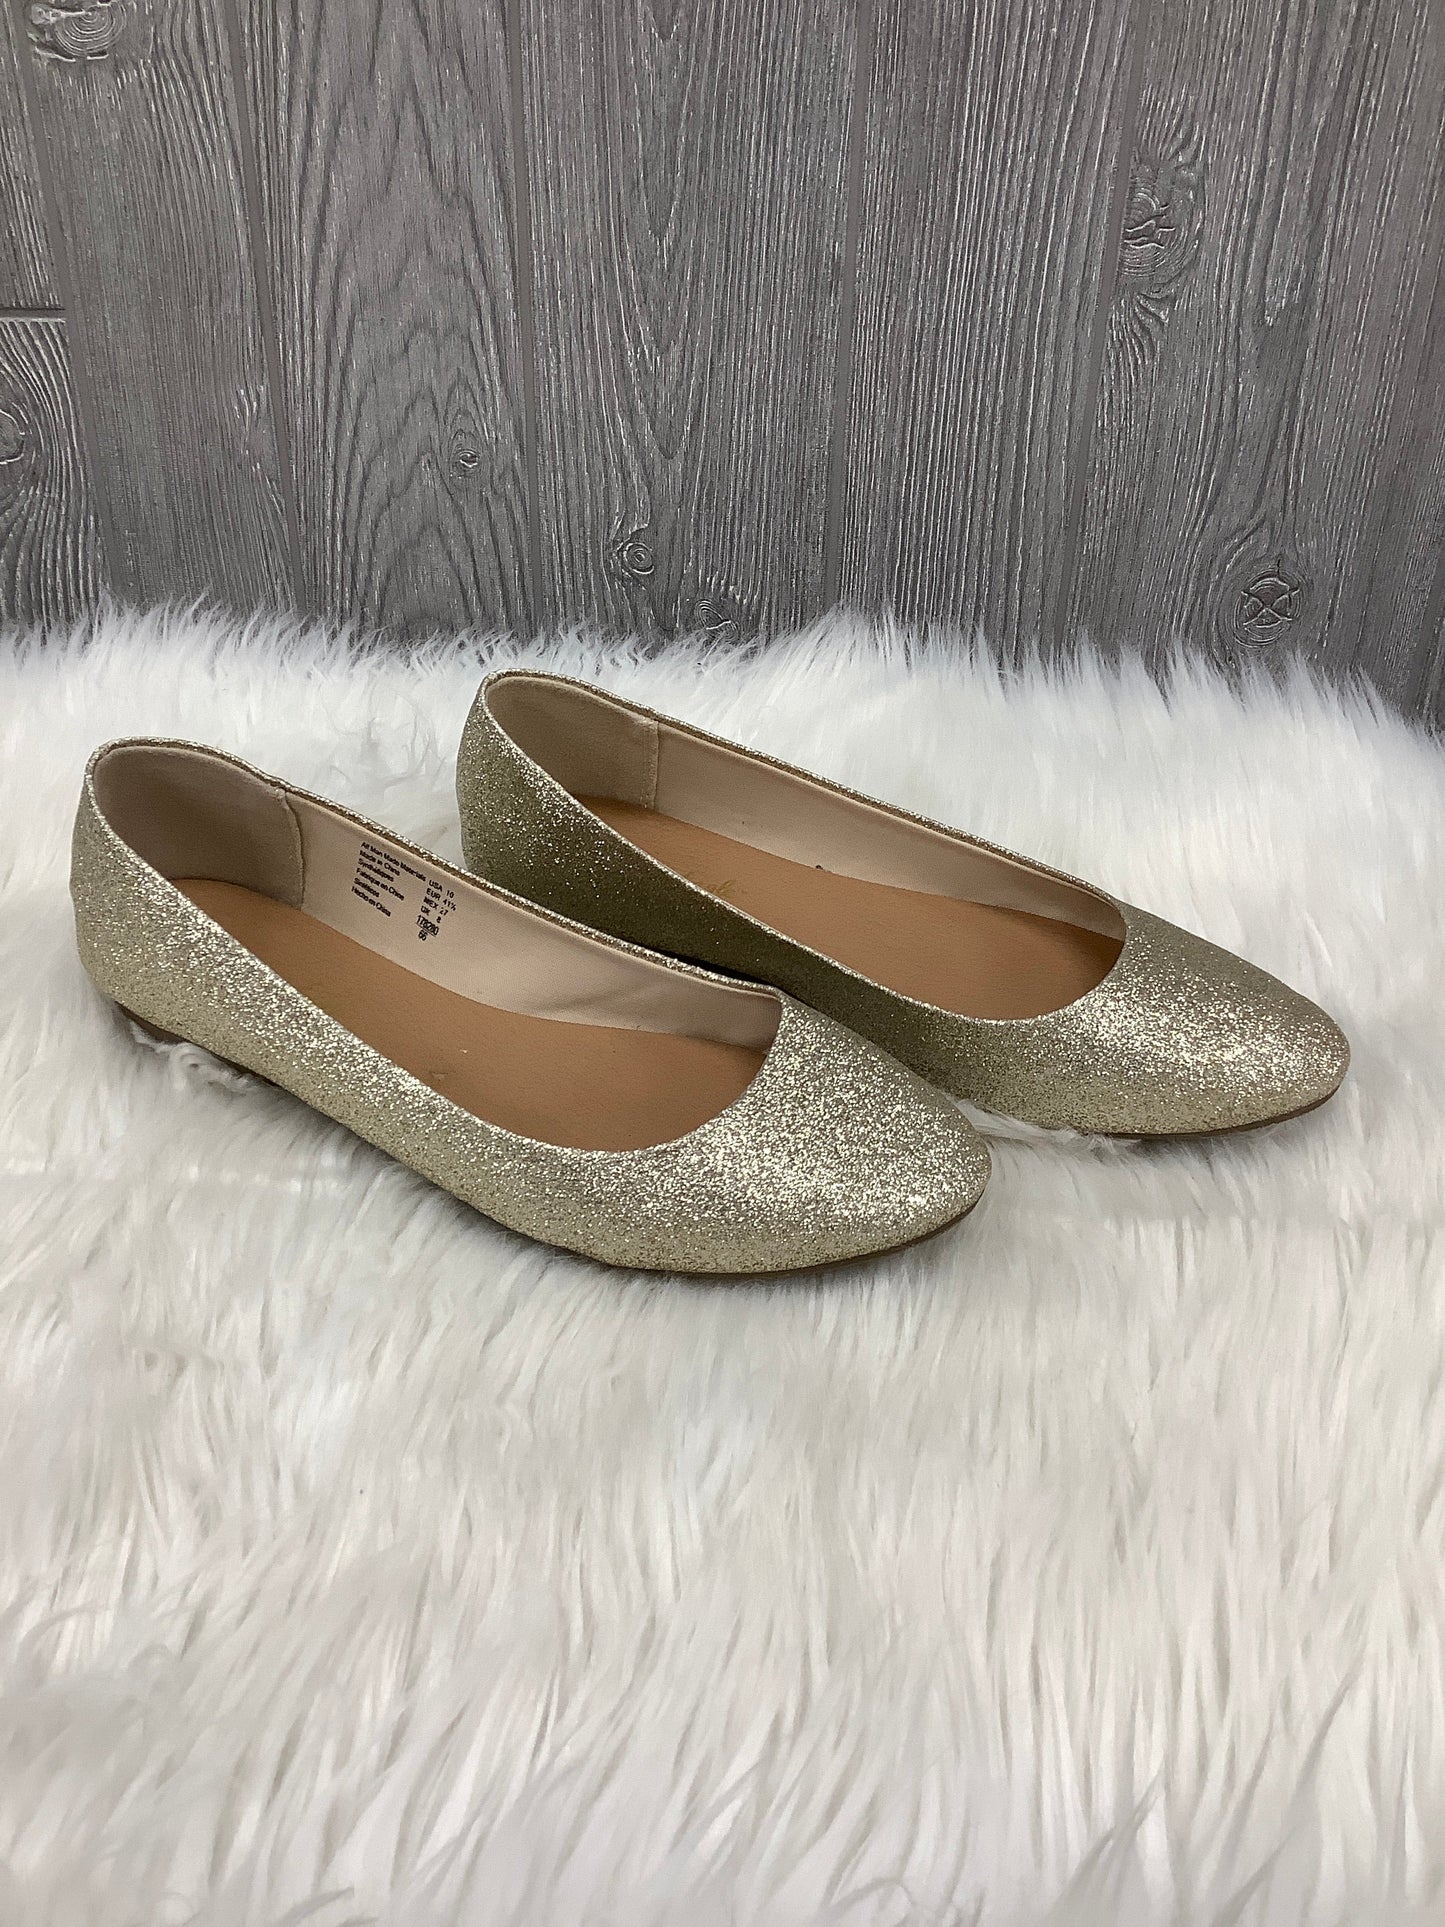 Shoes Flats Ballet By American Eagle  Size: 10